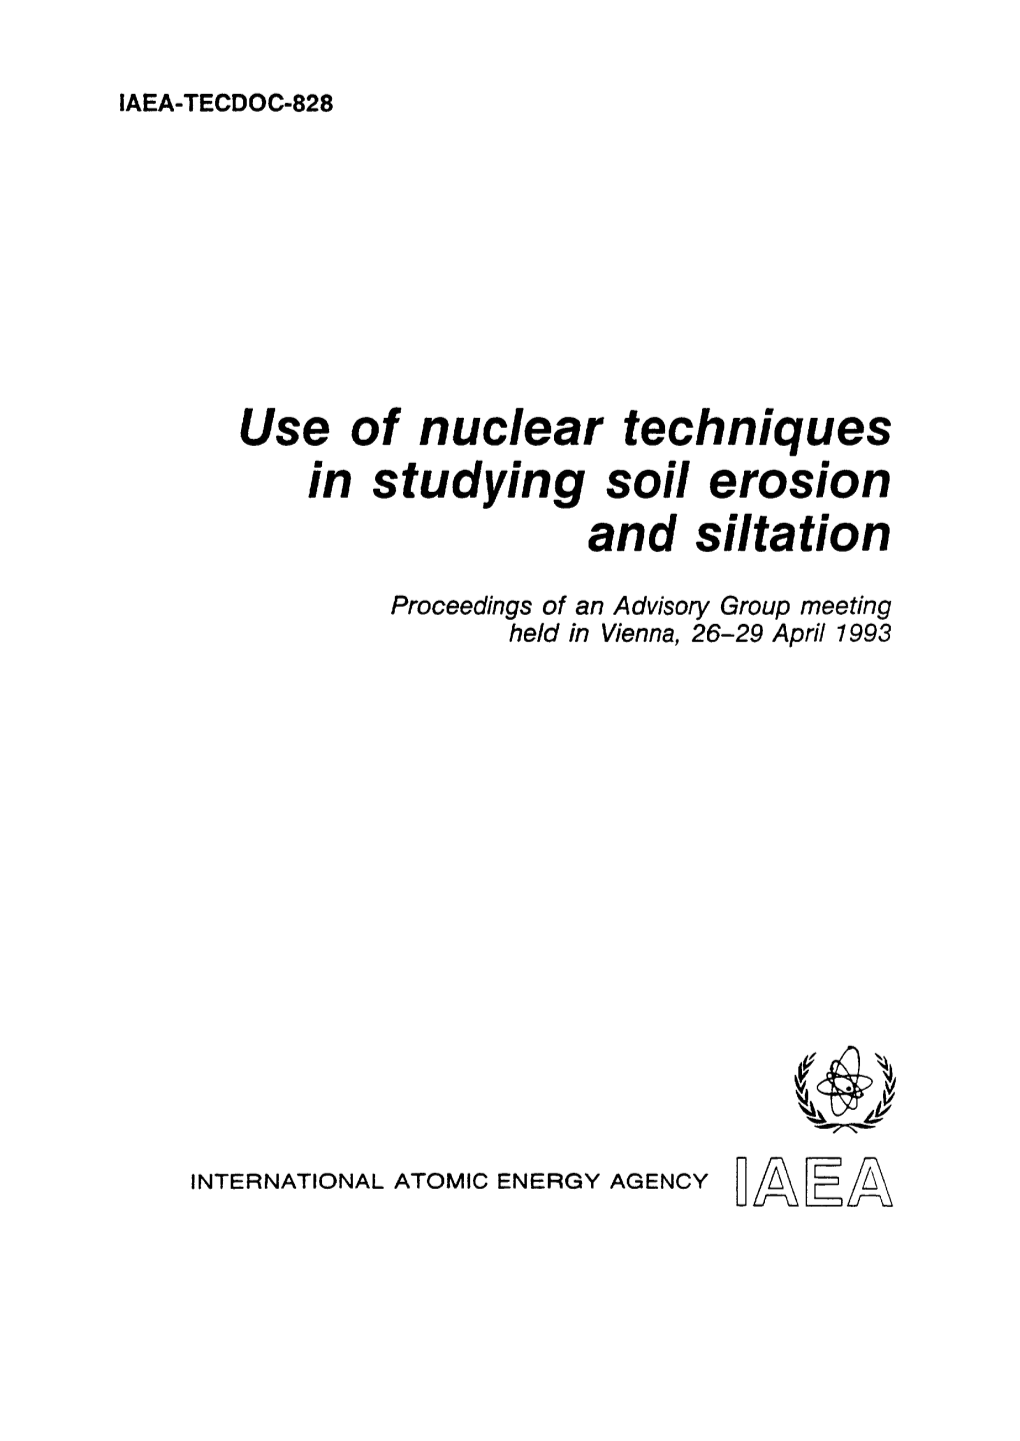 Use of Nuclear Techniques in Studying Soil Erosion and Siltation Number: IAEA-TECDOC-828